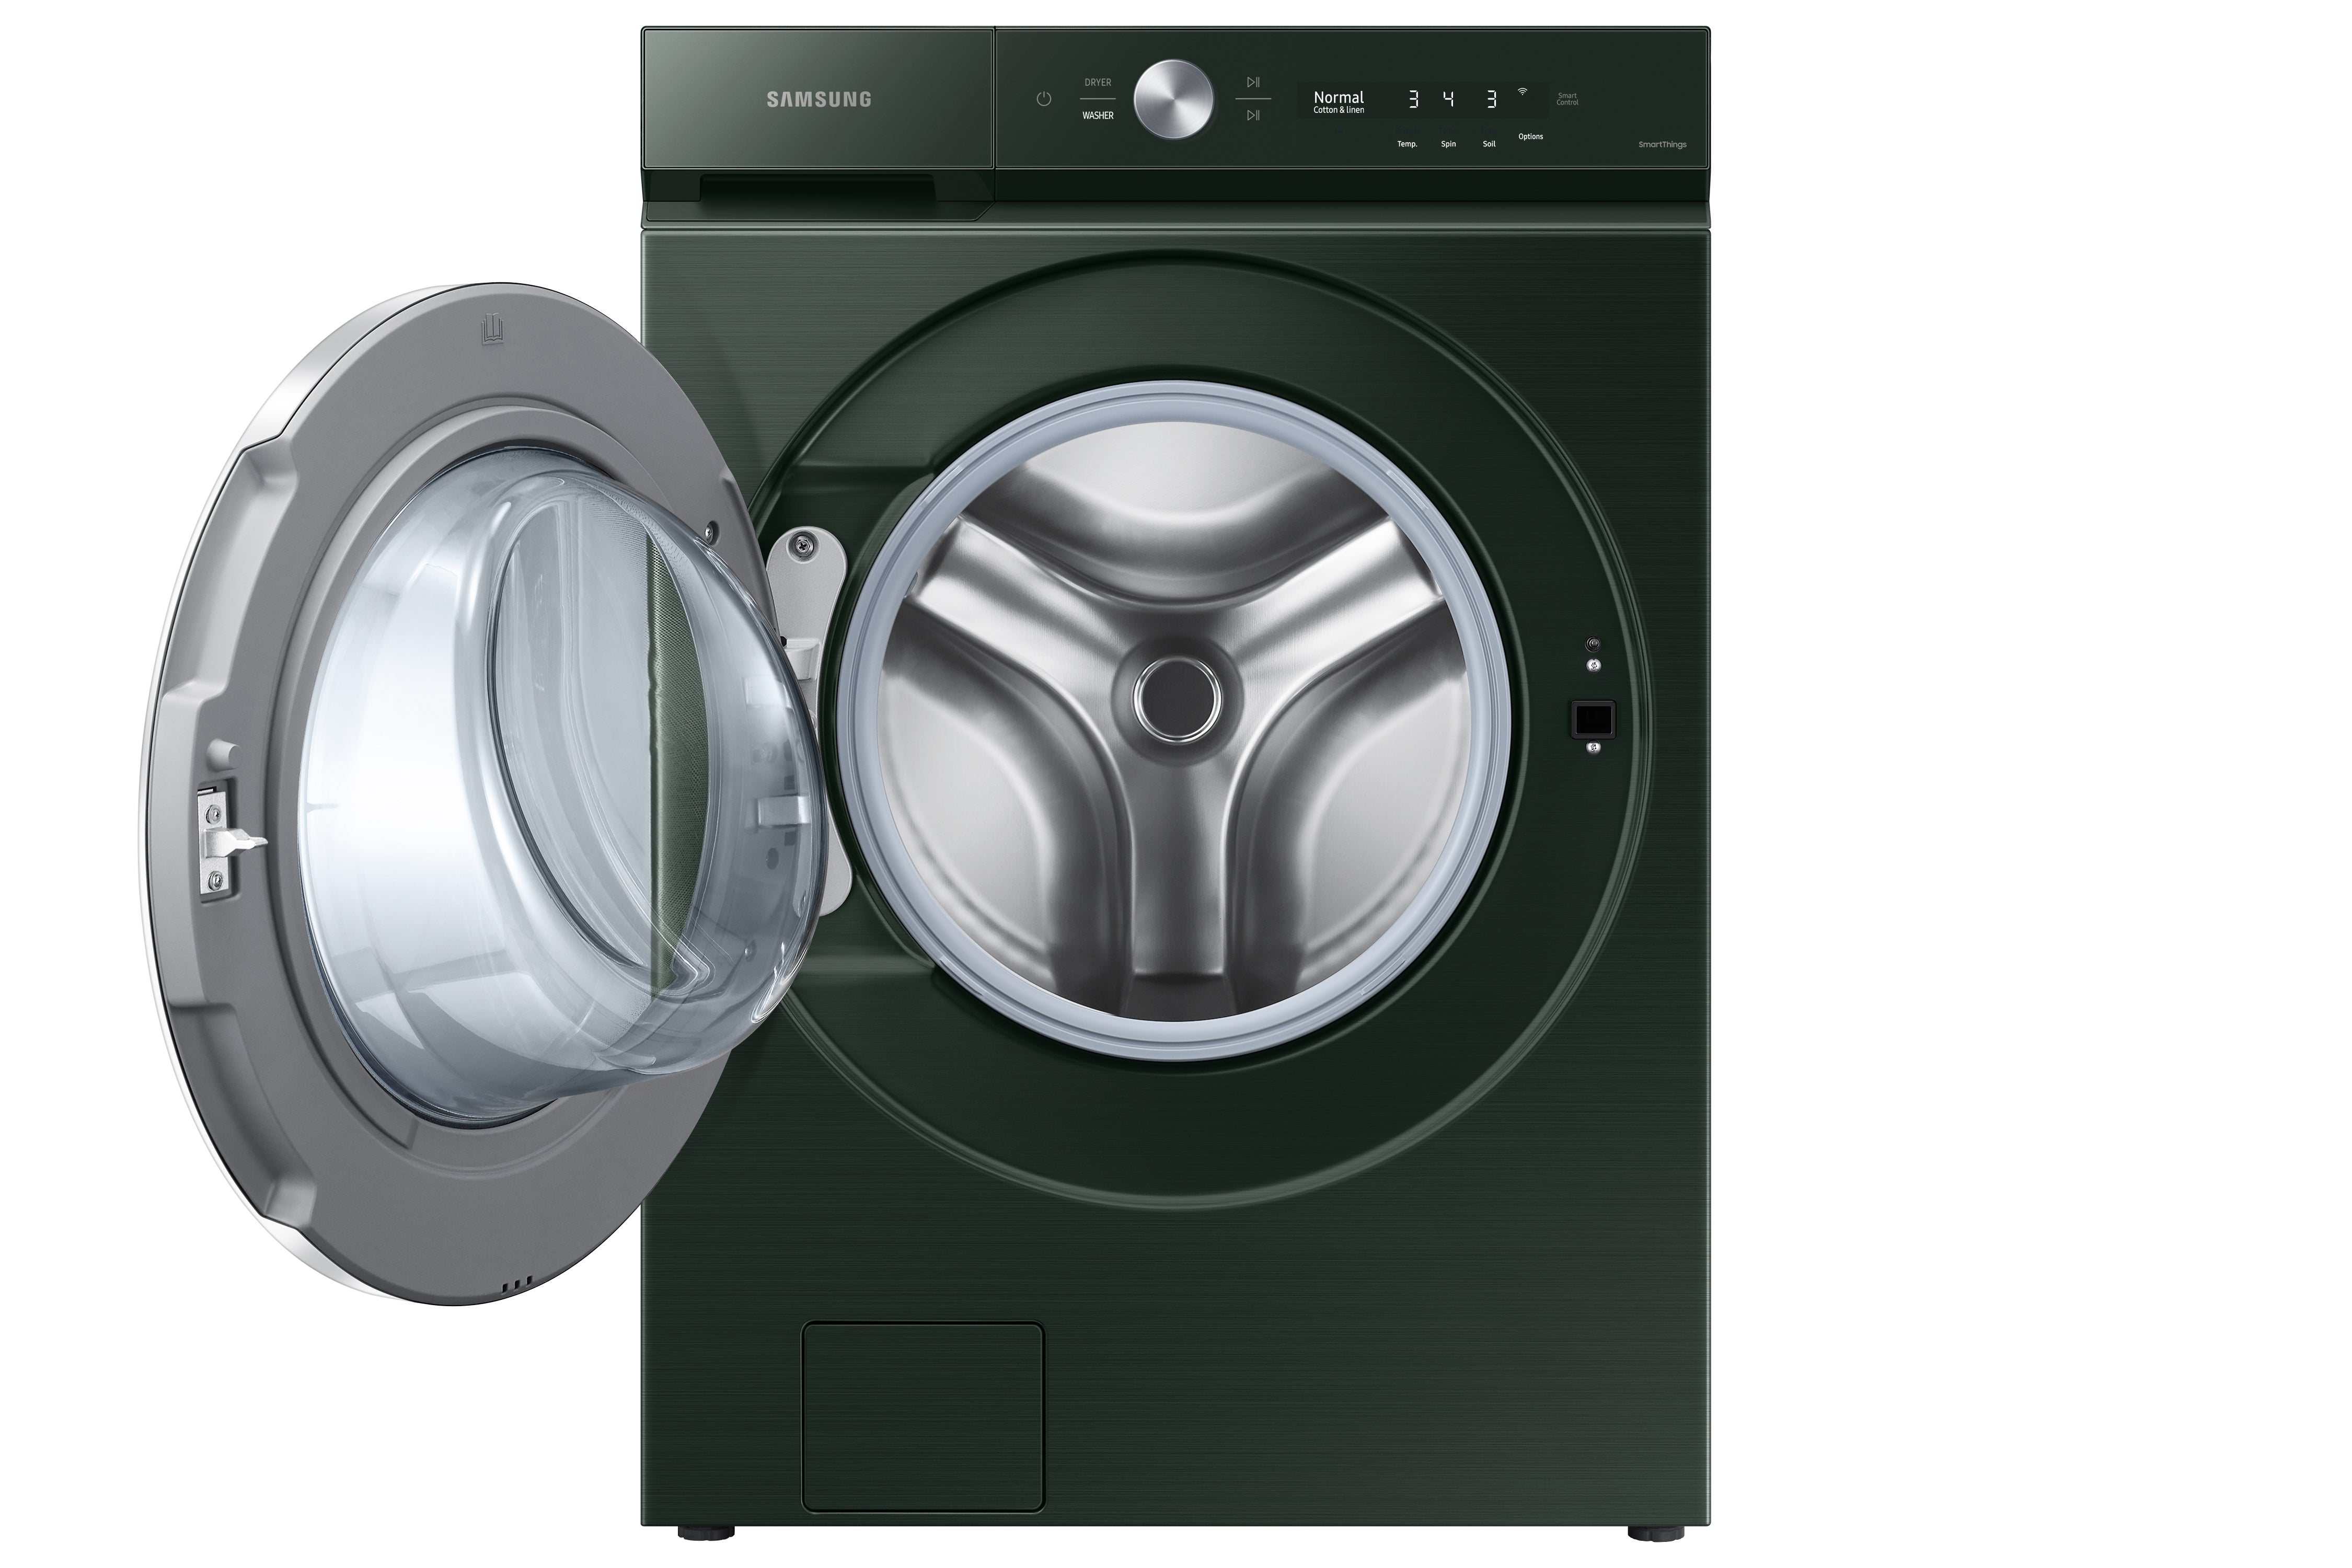 Samsung - 6.1 cu. Ft  Front Load Washer in Green - WF53BB8900AGUS